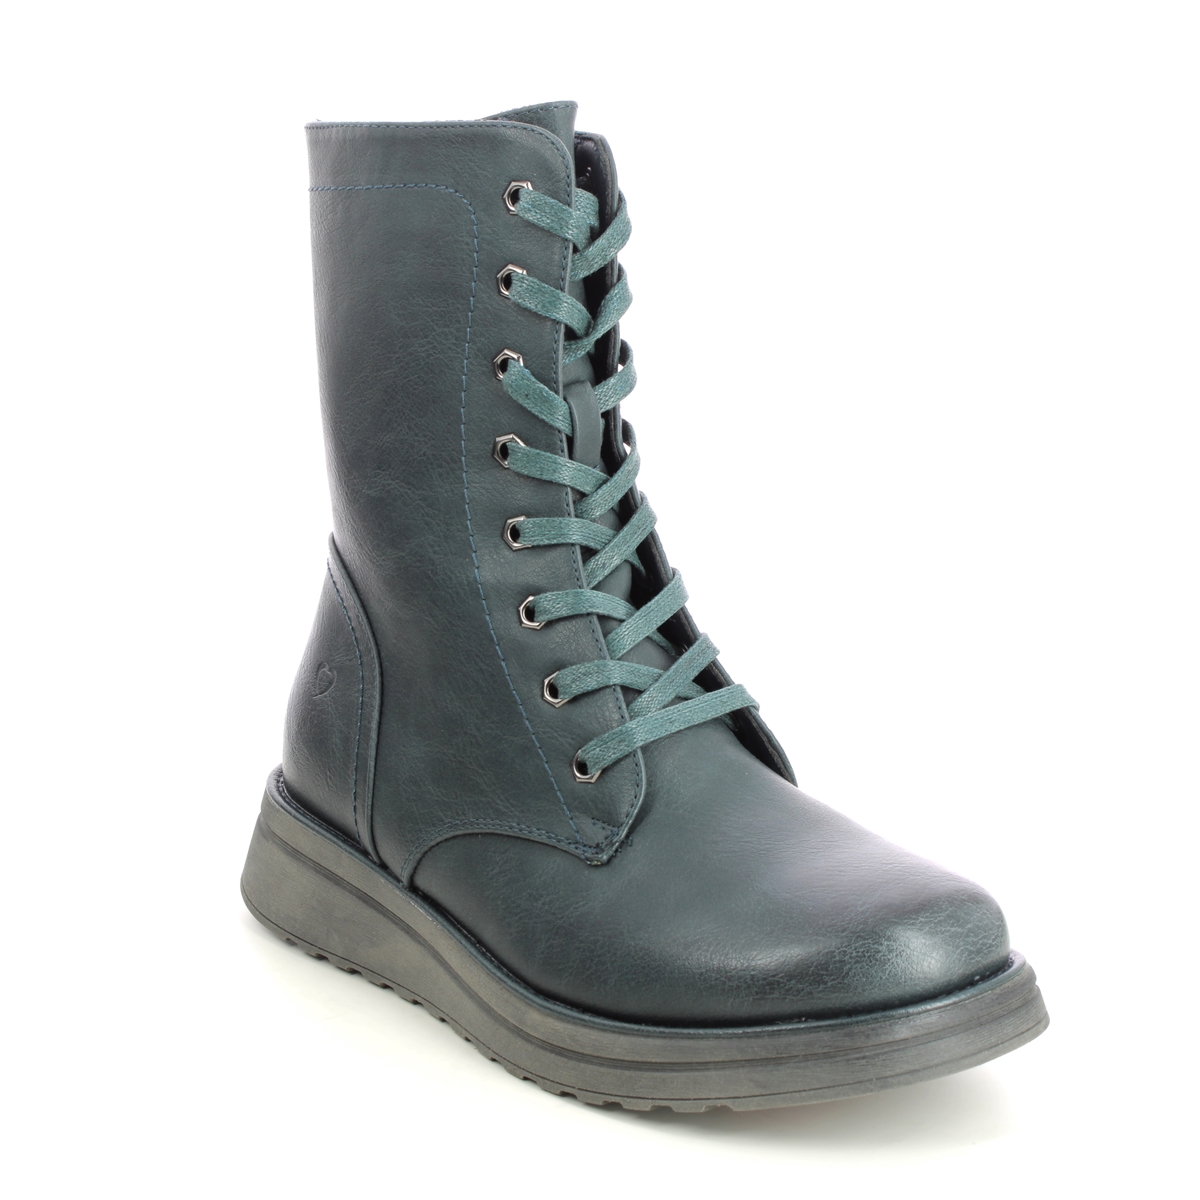 Heavenly Feet Martina Walker Teal Blue Womens Lace Up Boots 3509-73 In Size 8 In Plain Teal Blue